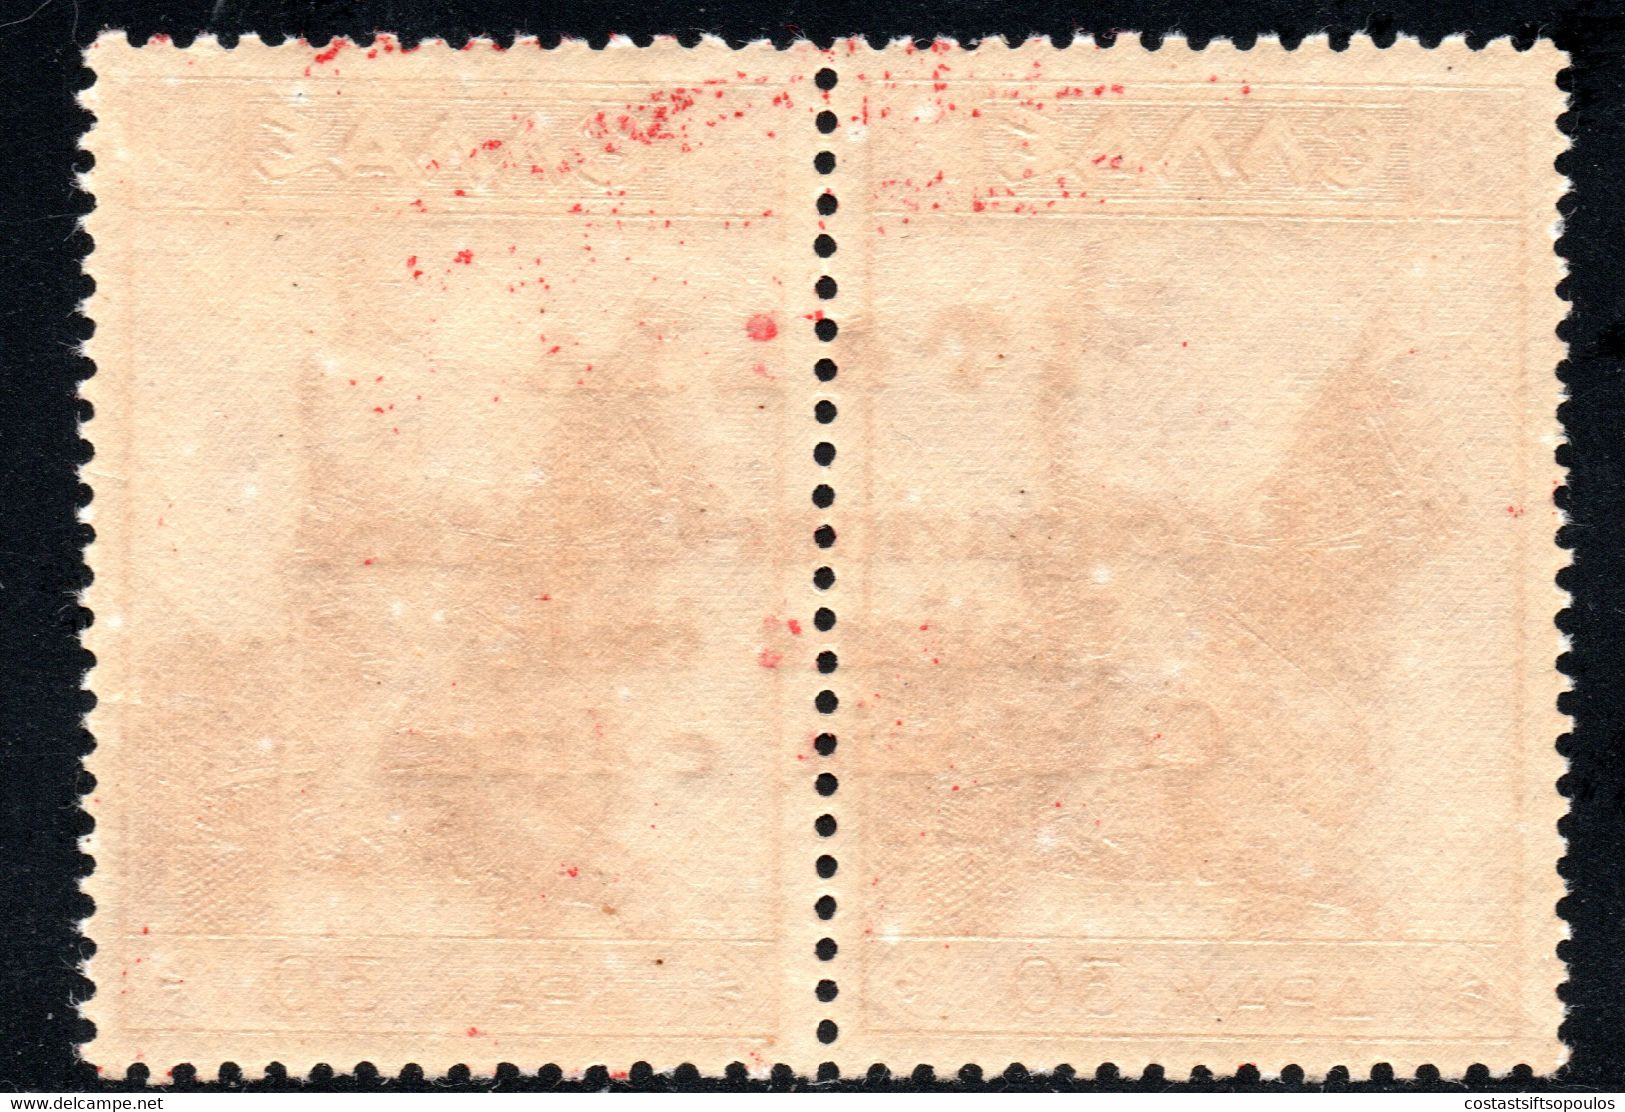 165.GREECE,ITALY,IONIAN,CEFALONIA,1941 30DR.RIDER,RED OVERPRINT???,MNH,POSSIBLY PRIVATE - Ionian Islands